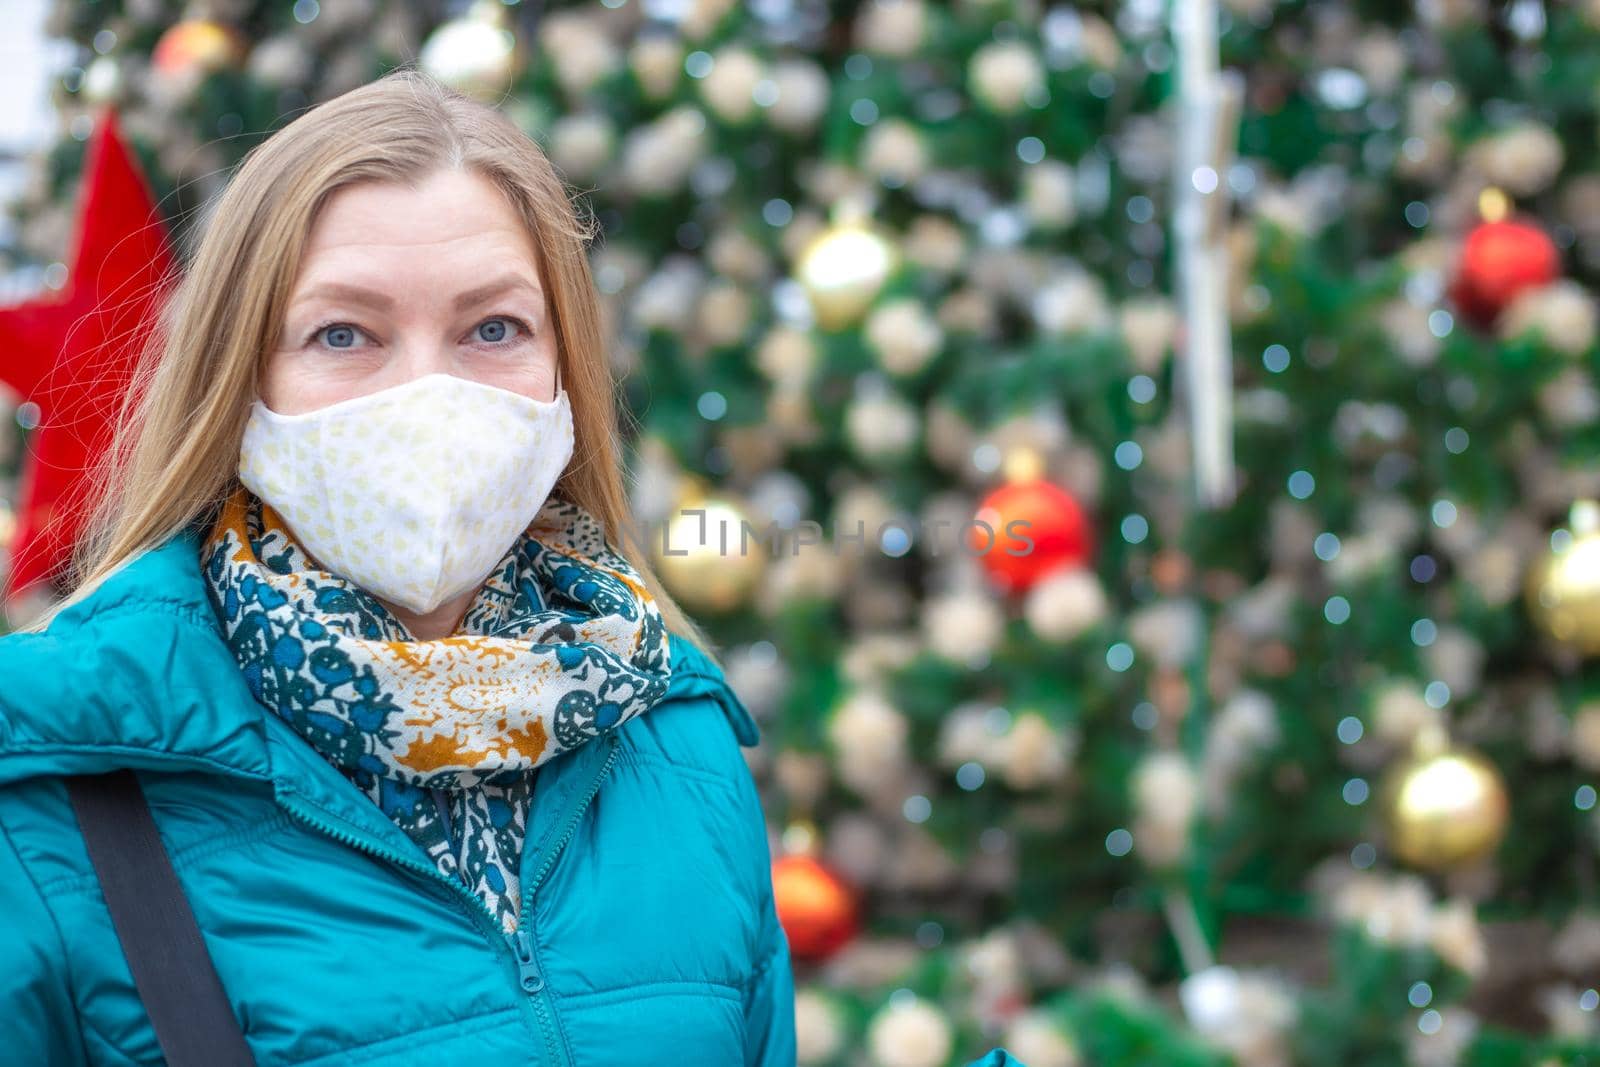 A woman in a protective mask near a festively decorated Christmas tree on the street. Christmas and New Year during the coronavirus pandemic by levnat09